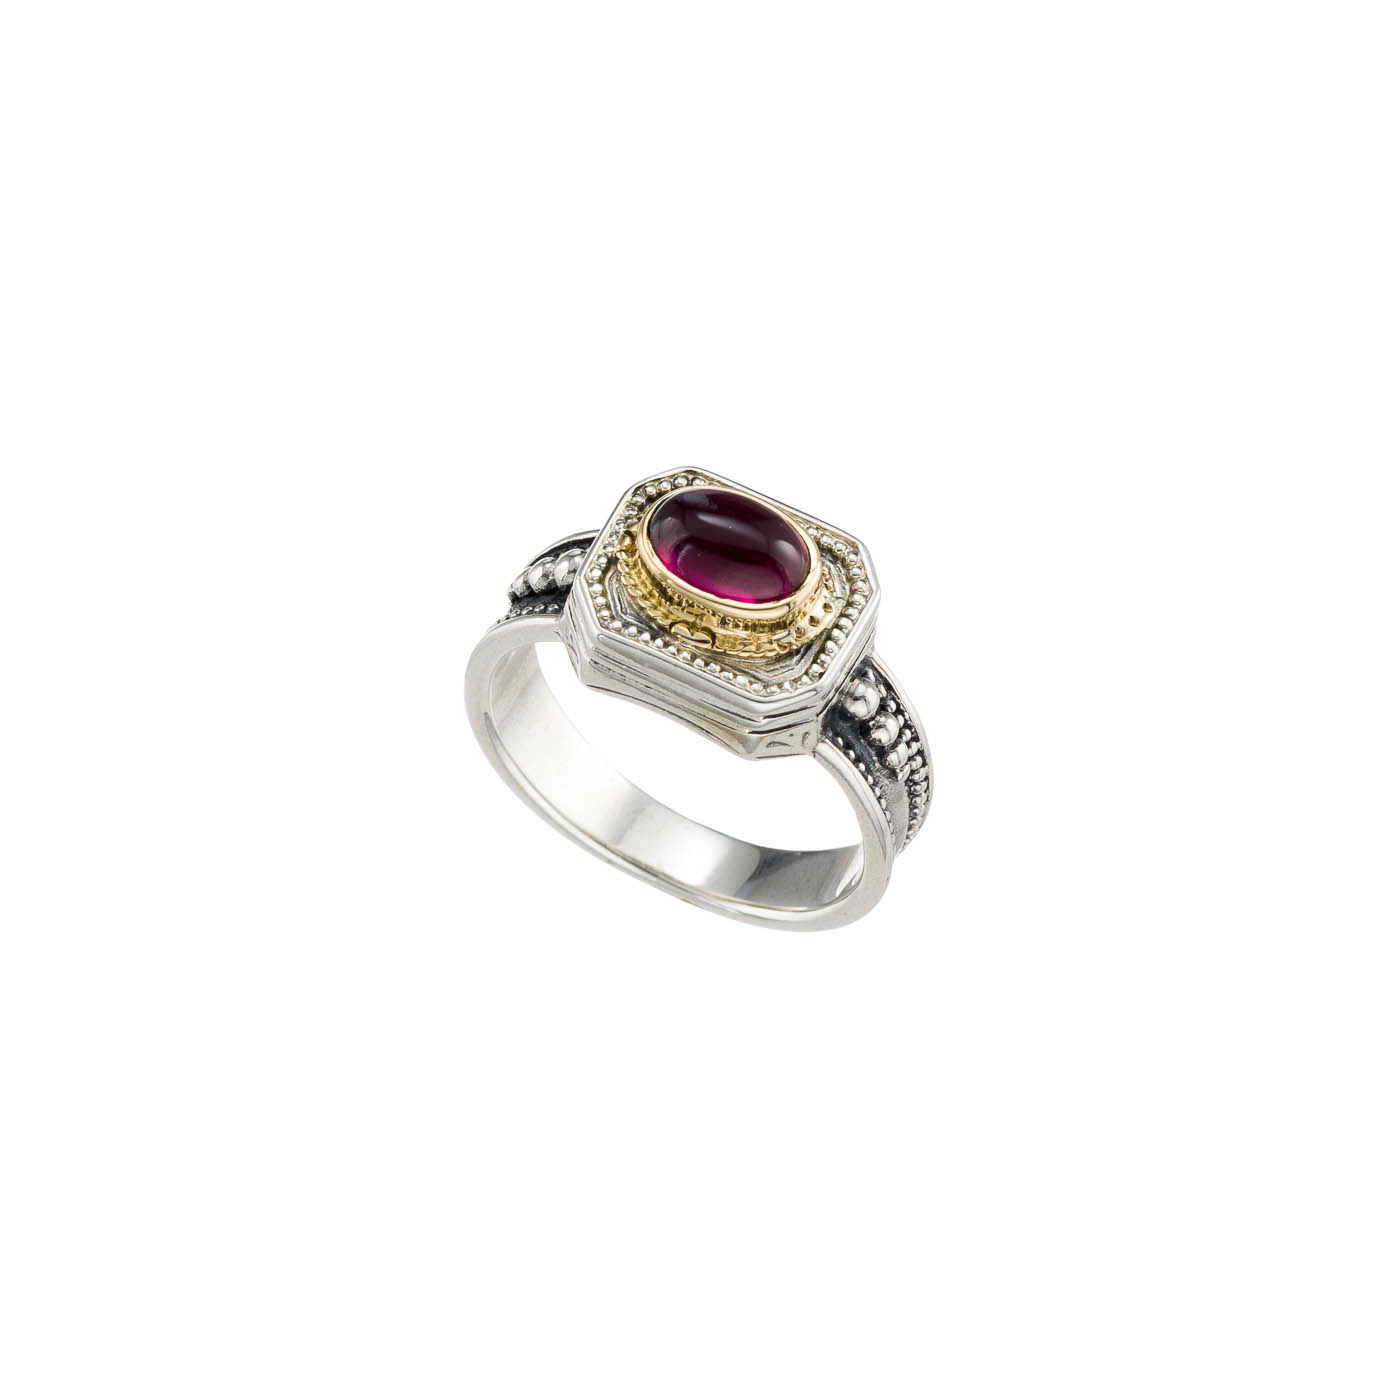 Cyclades Ring in 18K Gold and sterling silver with garnet